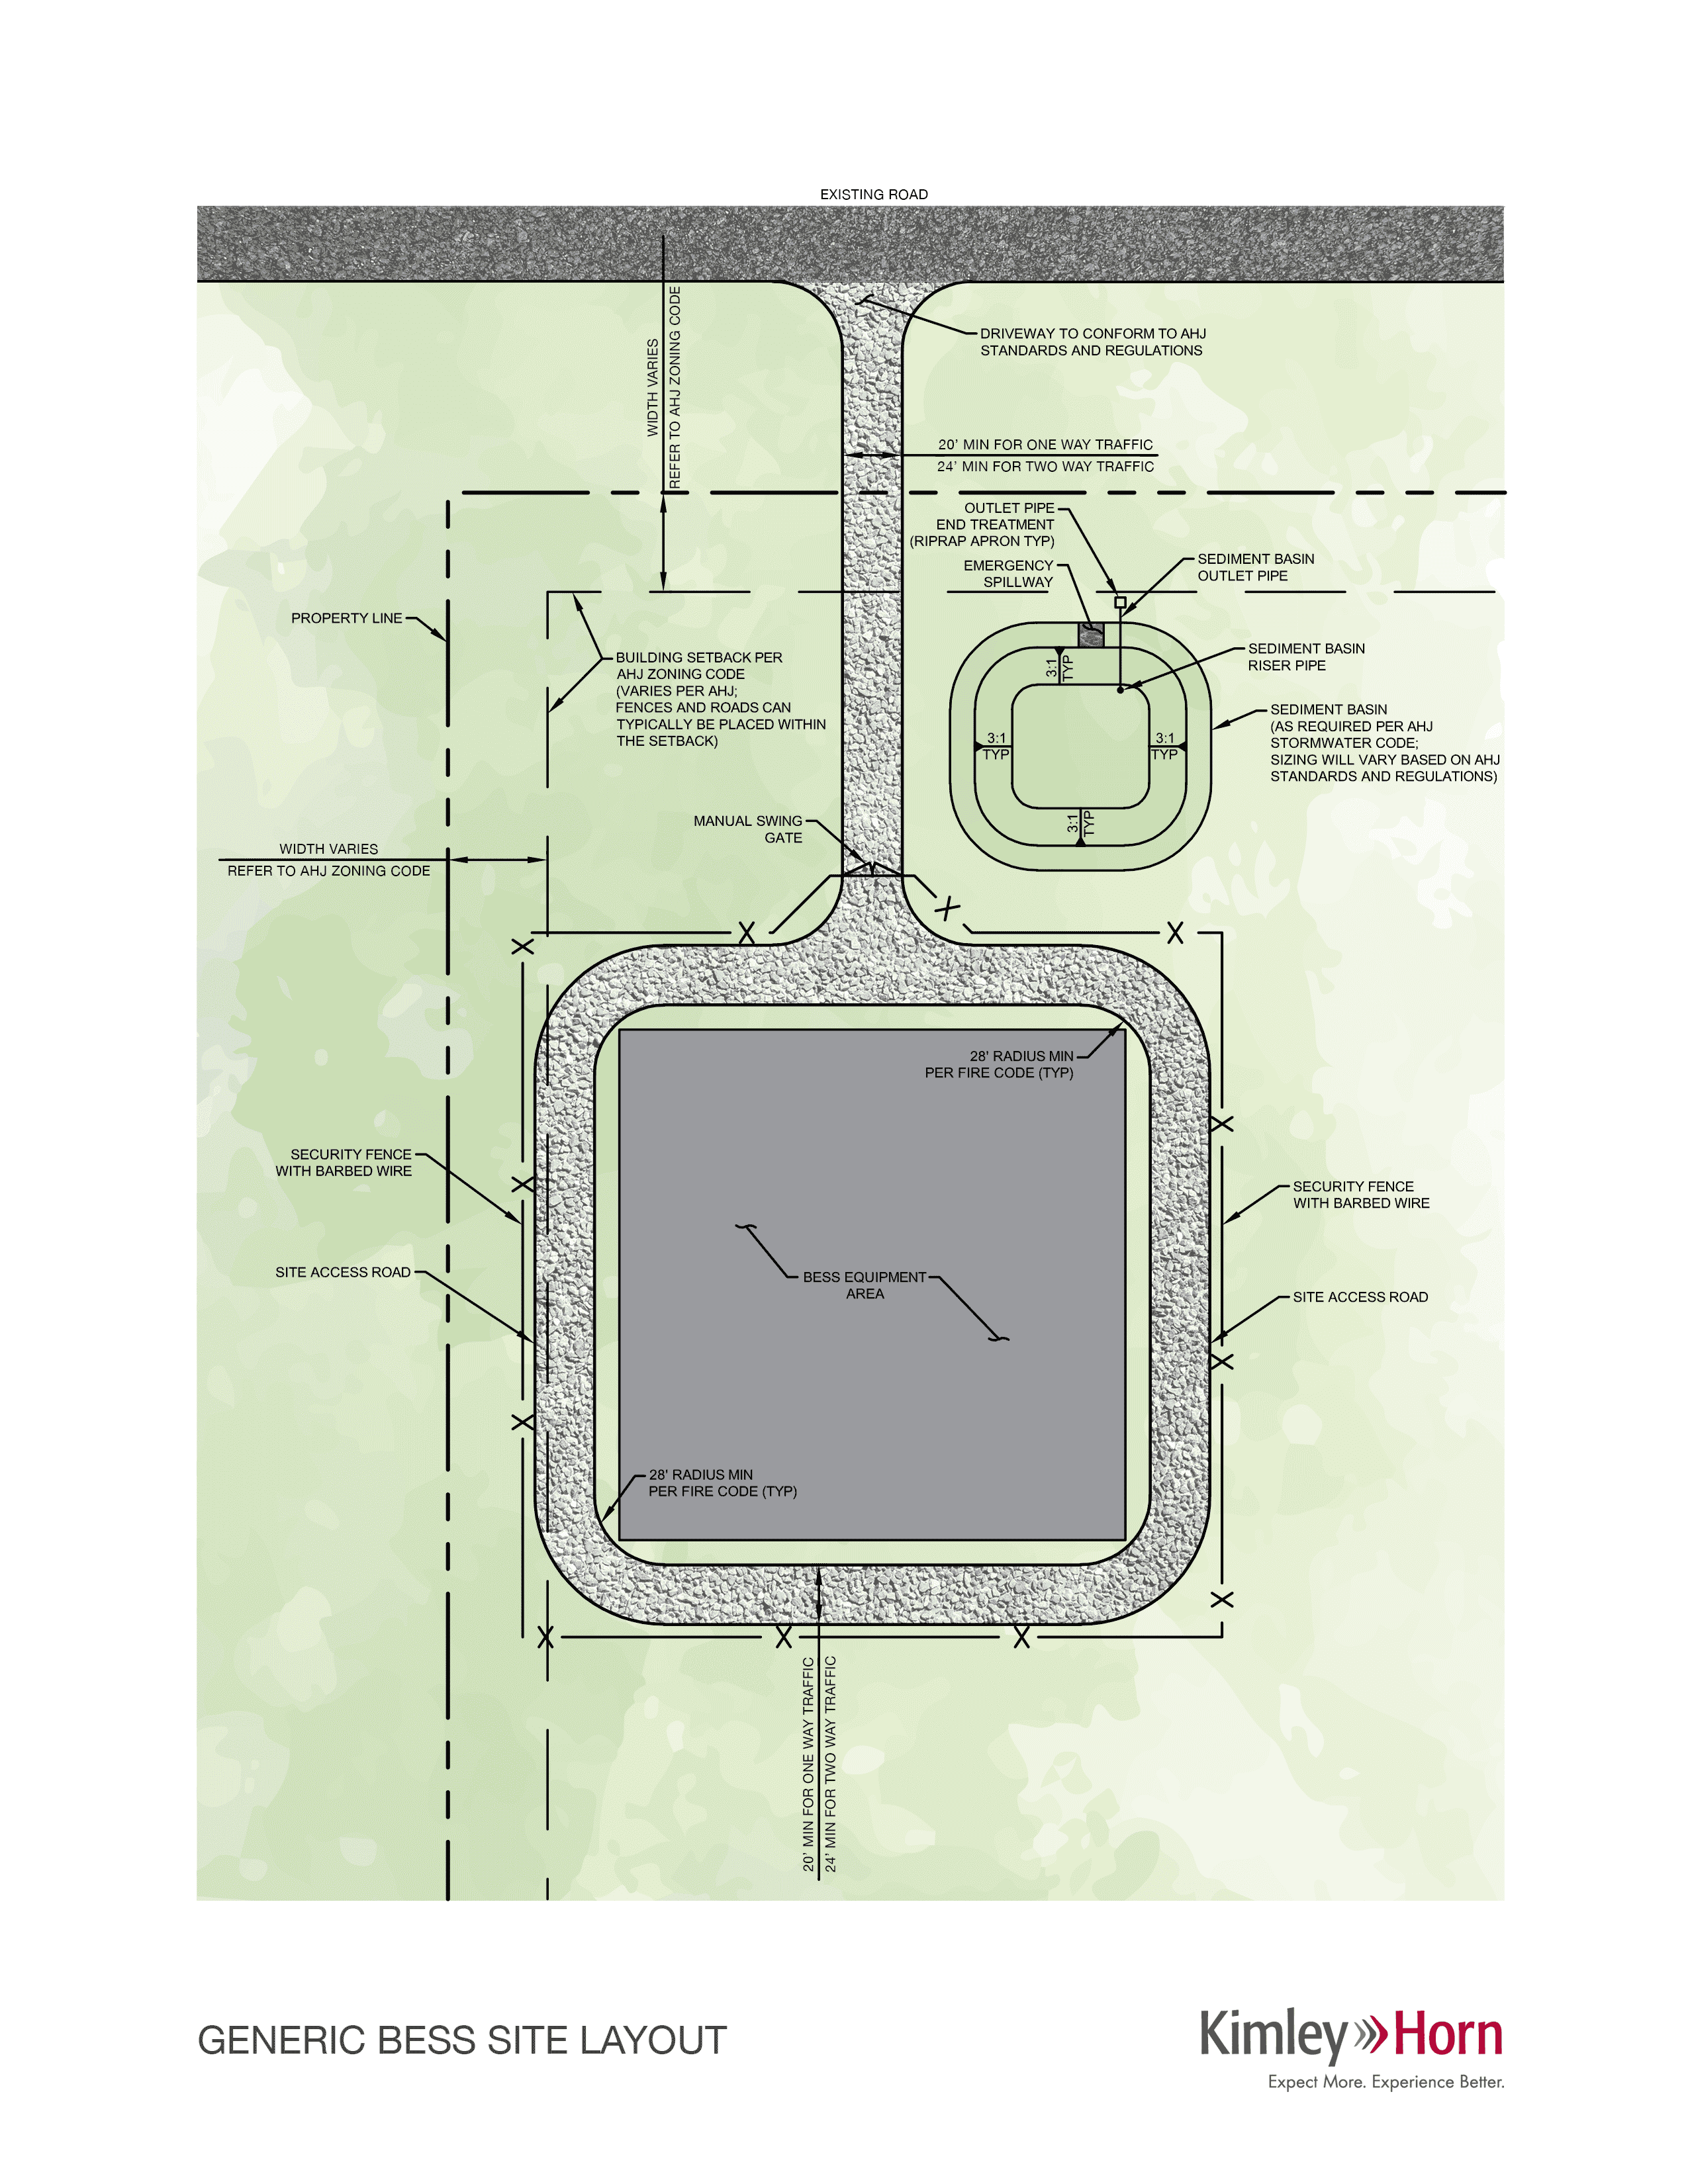 Layout of an example of a battery energy storage system